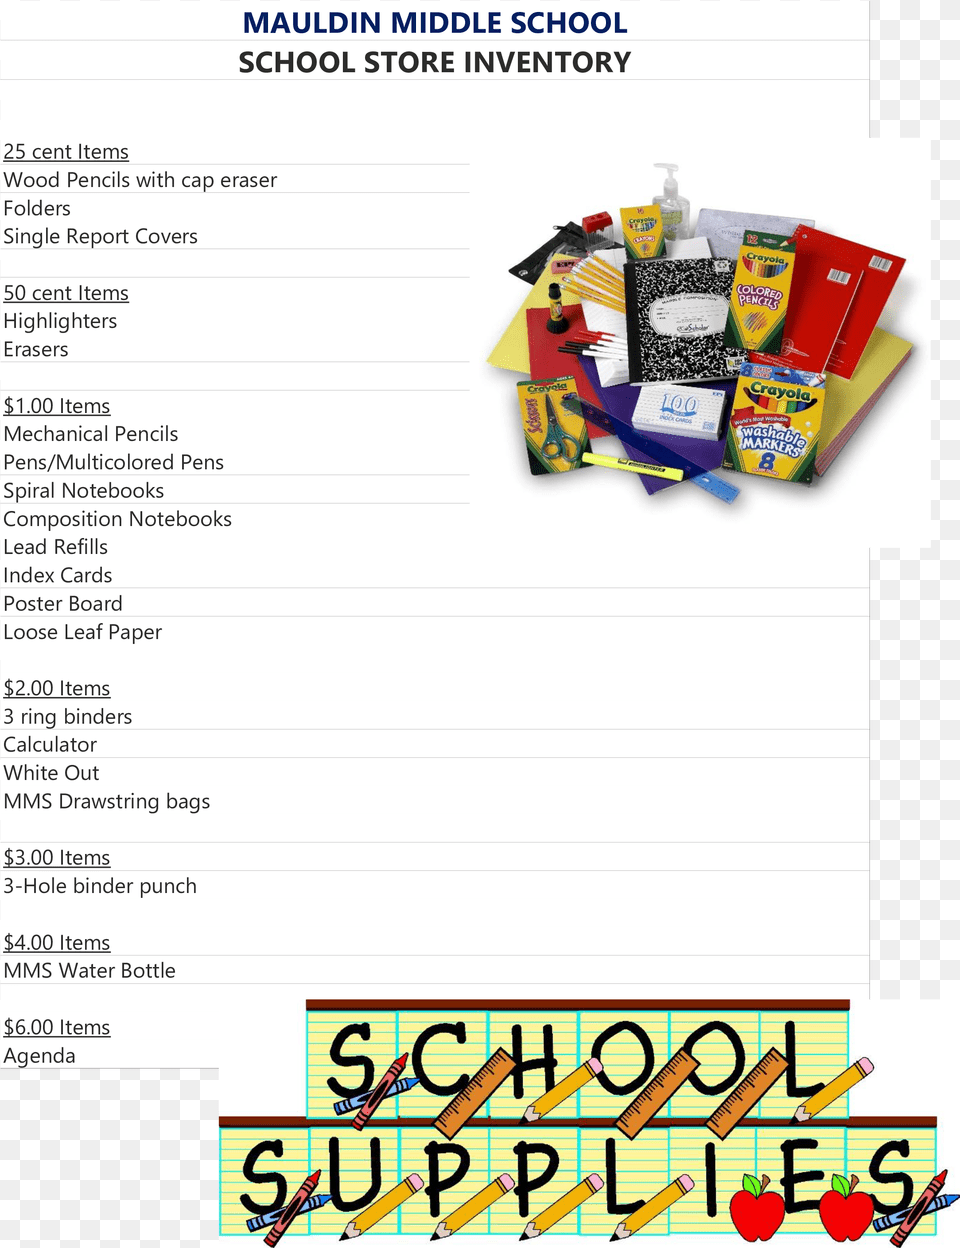 School Store Inventory Main Image  Third Through Fifth Grade Supply Pack, Advertisement, Poster, Food, Sweets Png